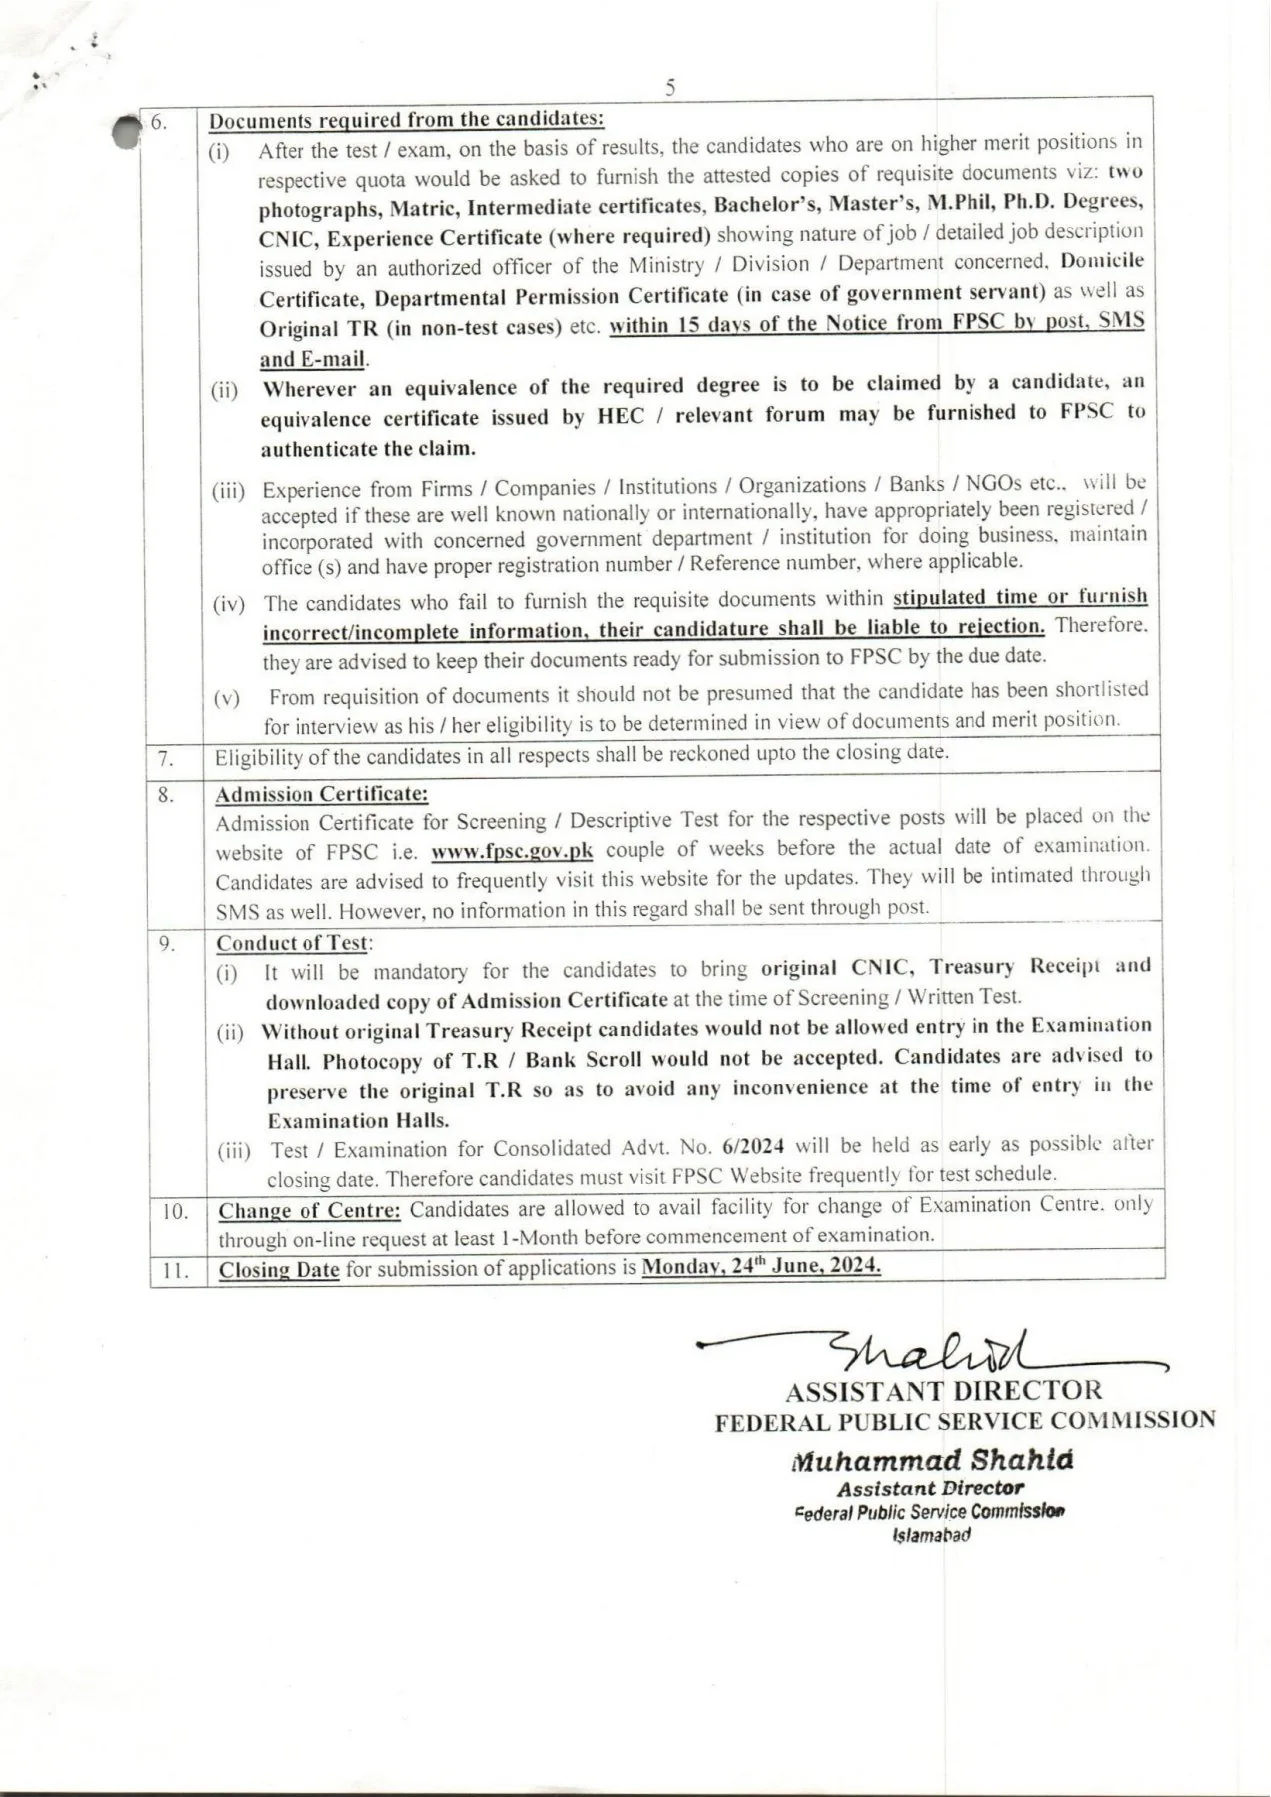 Federal Public Service Commission (FPSC) - Consolidated Advertisement No. 6/2024